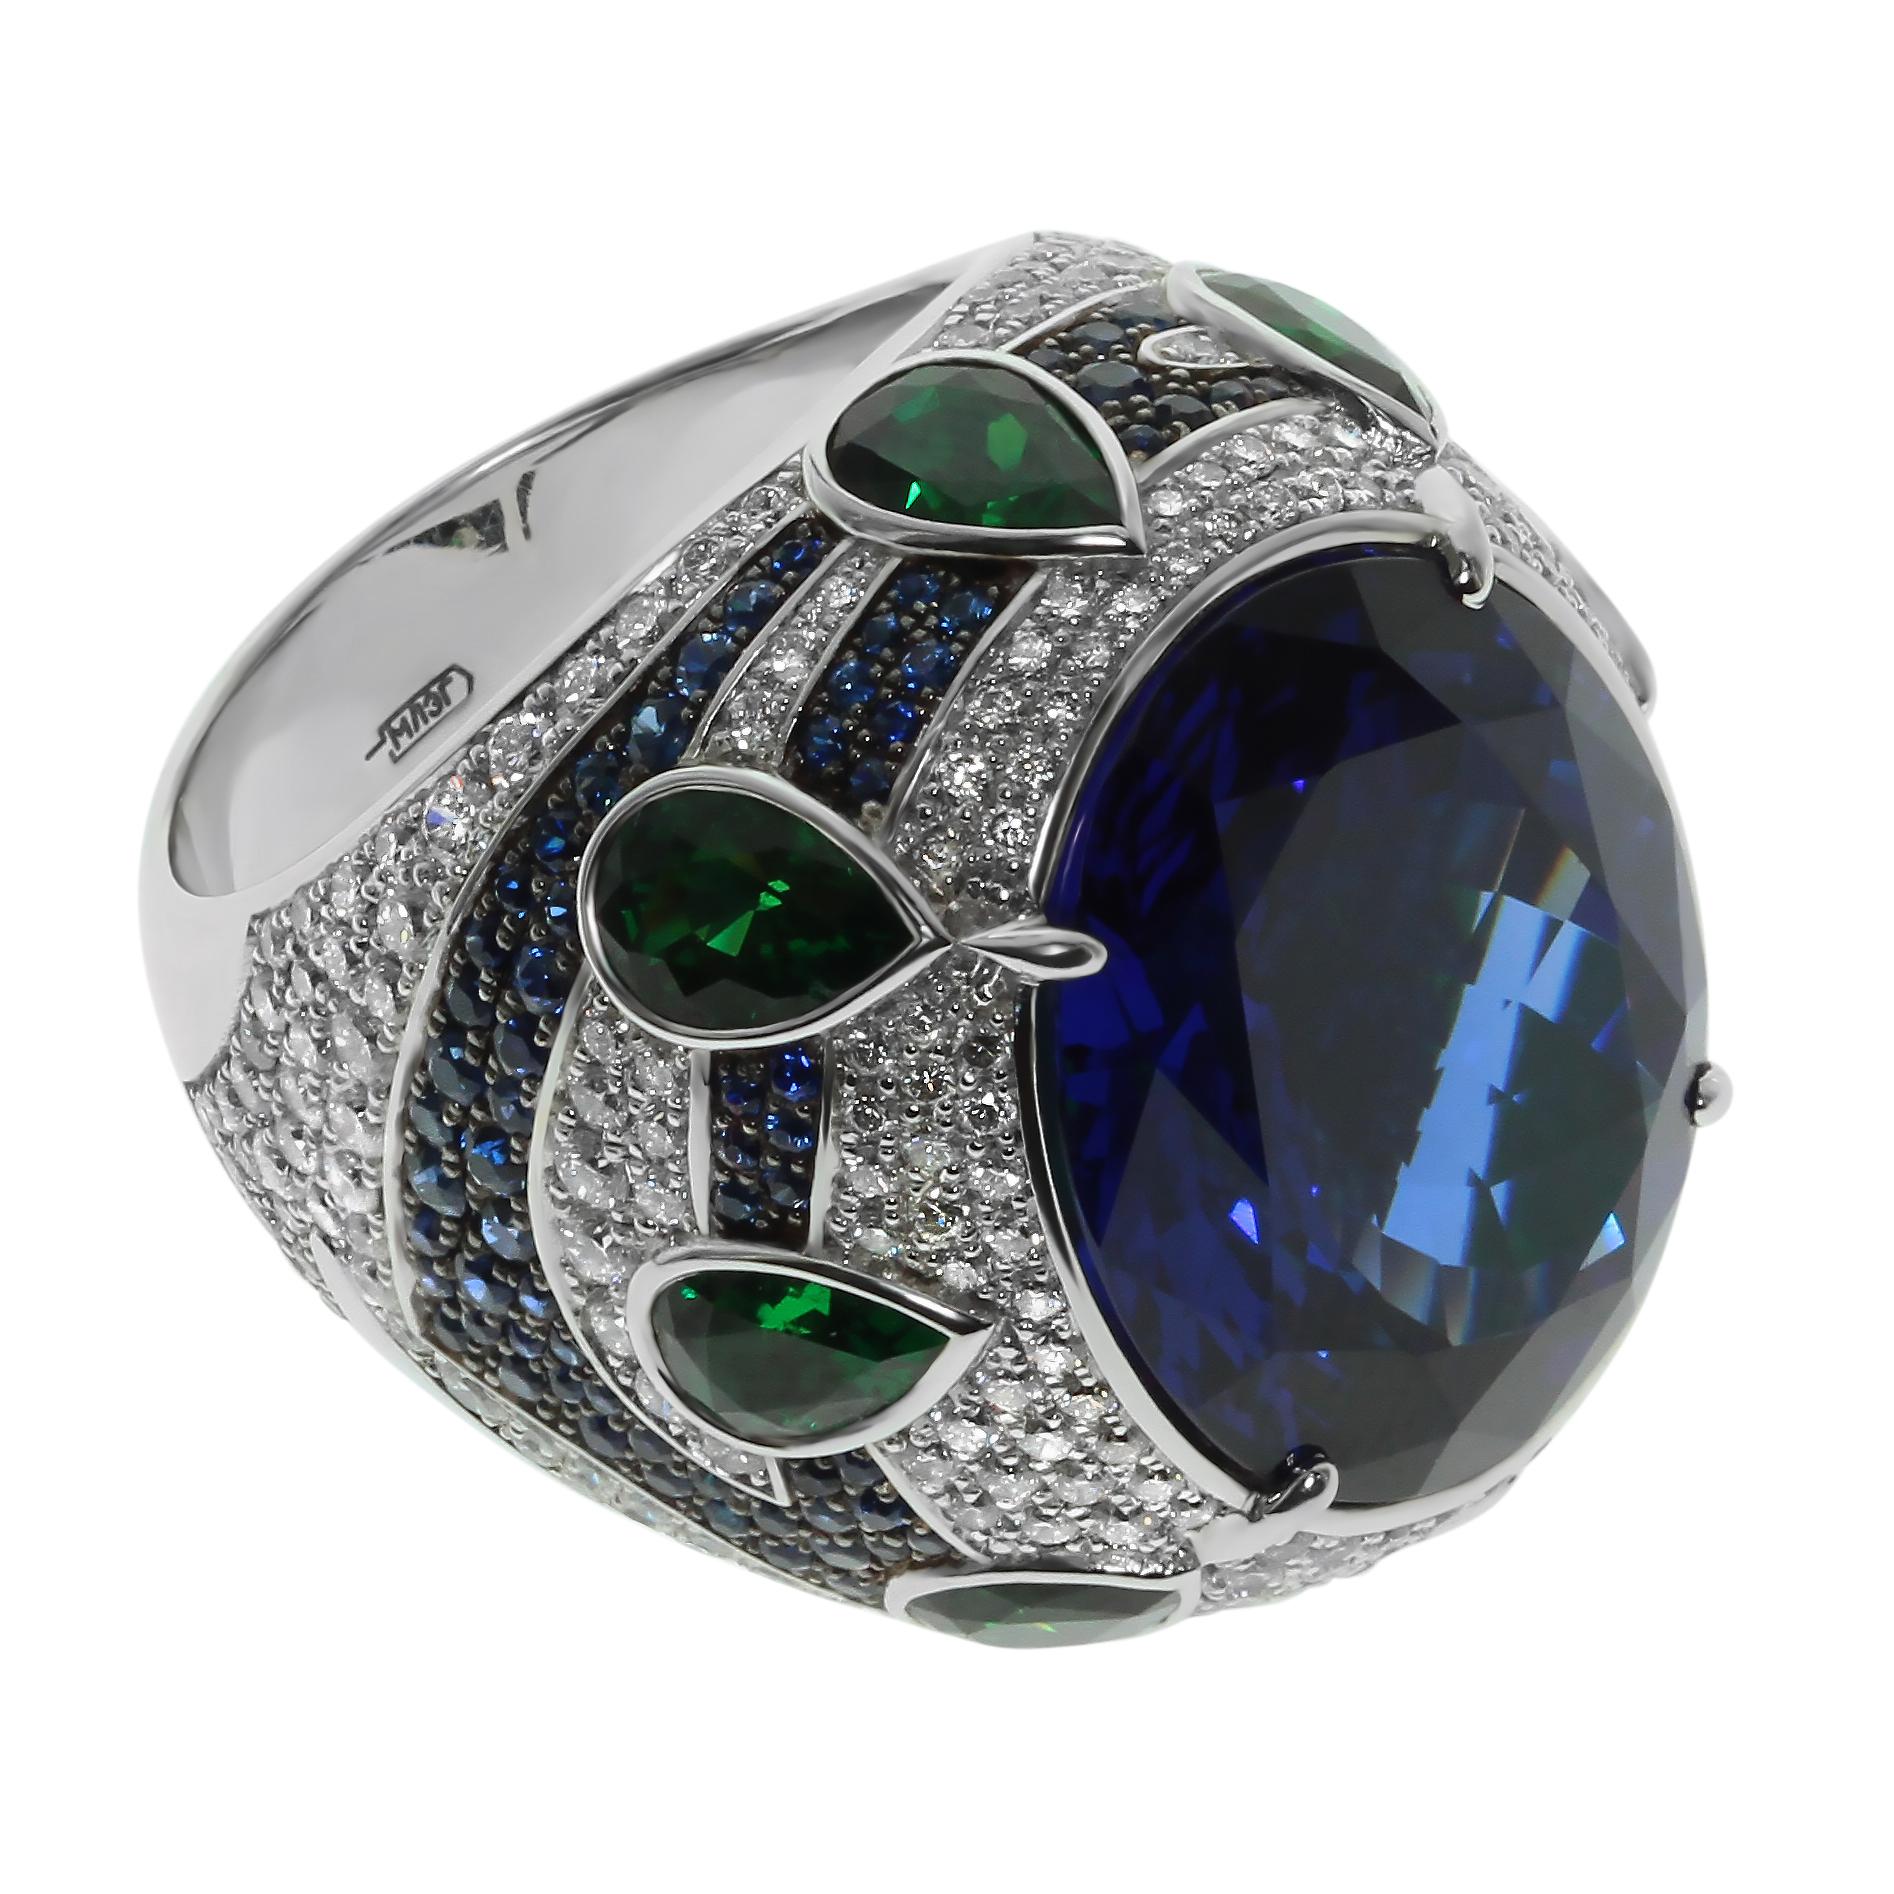 Tanzanite 19.82ct Diamonds Tsavorites 18 Karat White Gold Oriental Magrib Ring

Pure Oriental, Pure Imperial style. If you love 1000&1 Night story, and dream about Arabian Night - this ring will be a star of your collection. Absolutely stunning rich